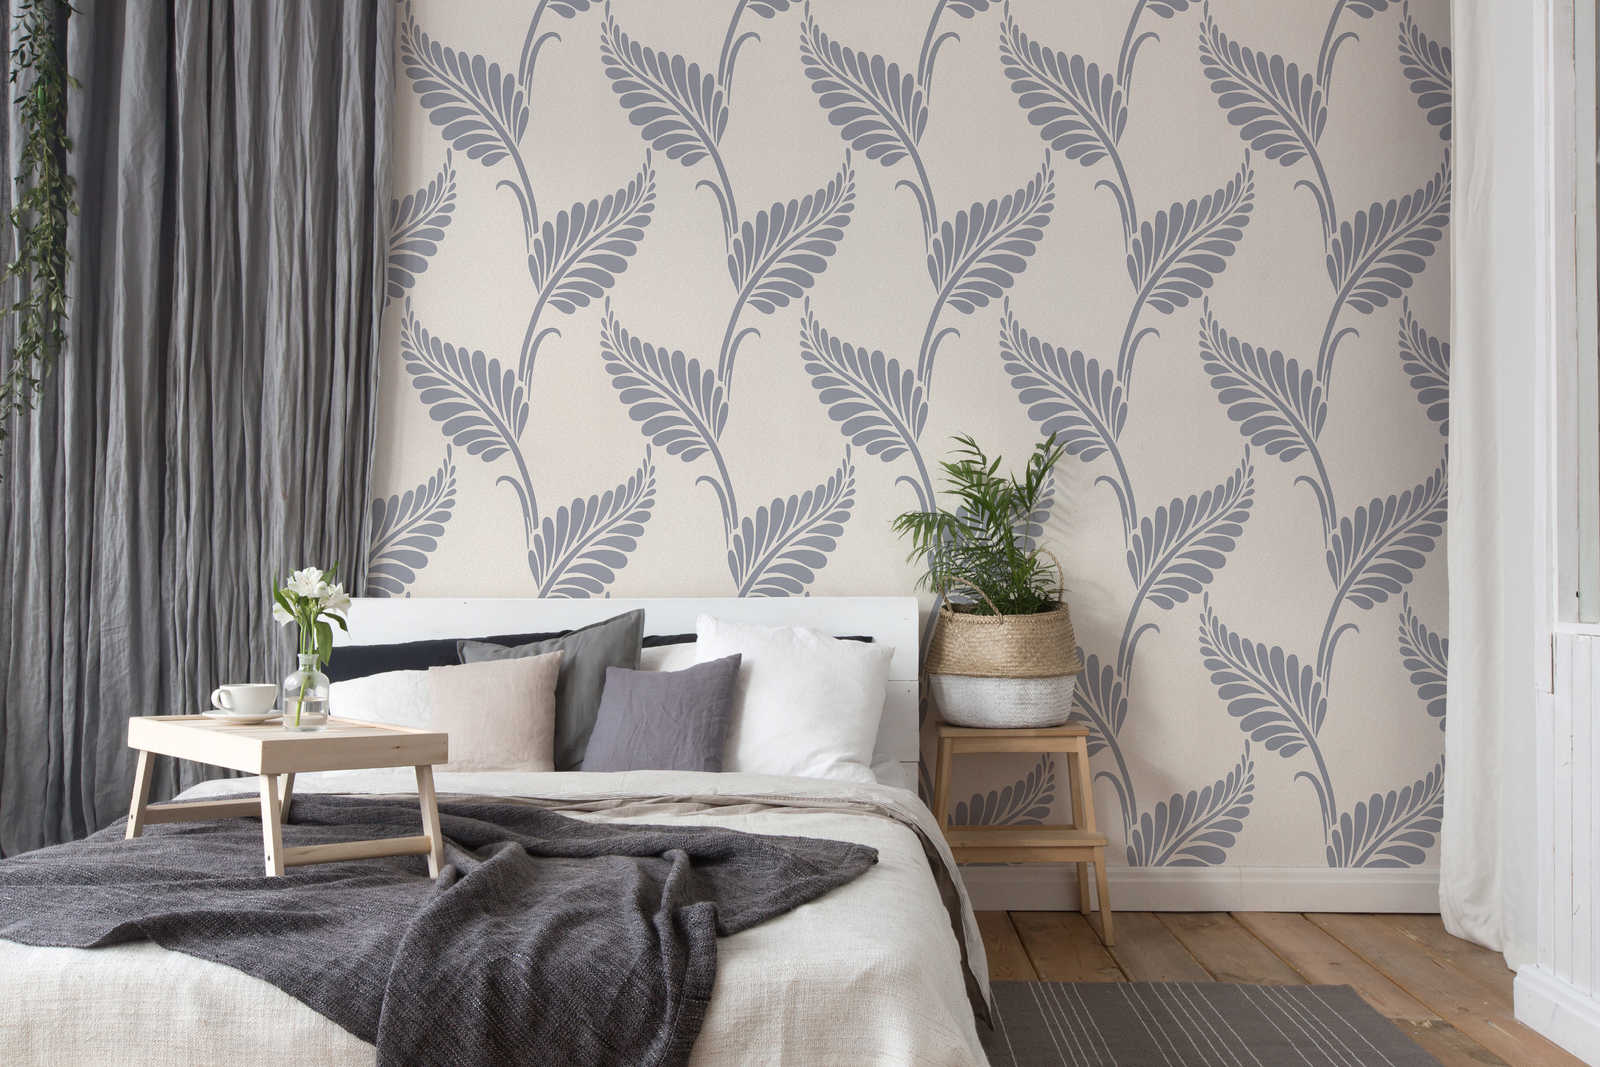             Paper wallpaper with leaves in floral style glossy - Greige, Silver
        